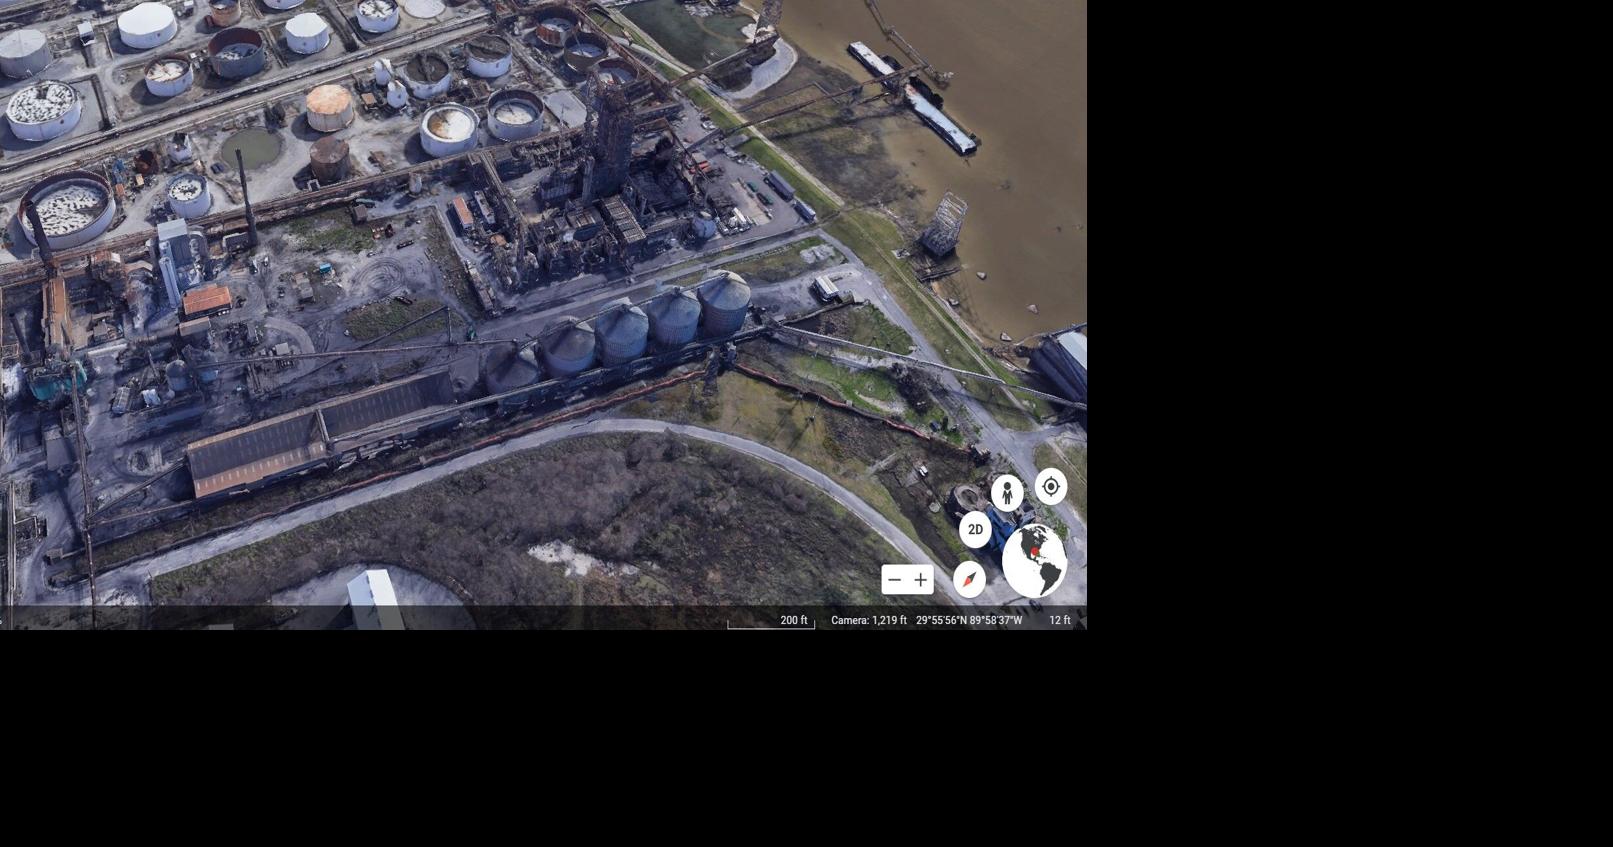 EPA finds St. Bernard Parish out of compliance with sulfur dioxide pollution standards